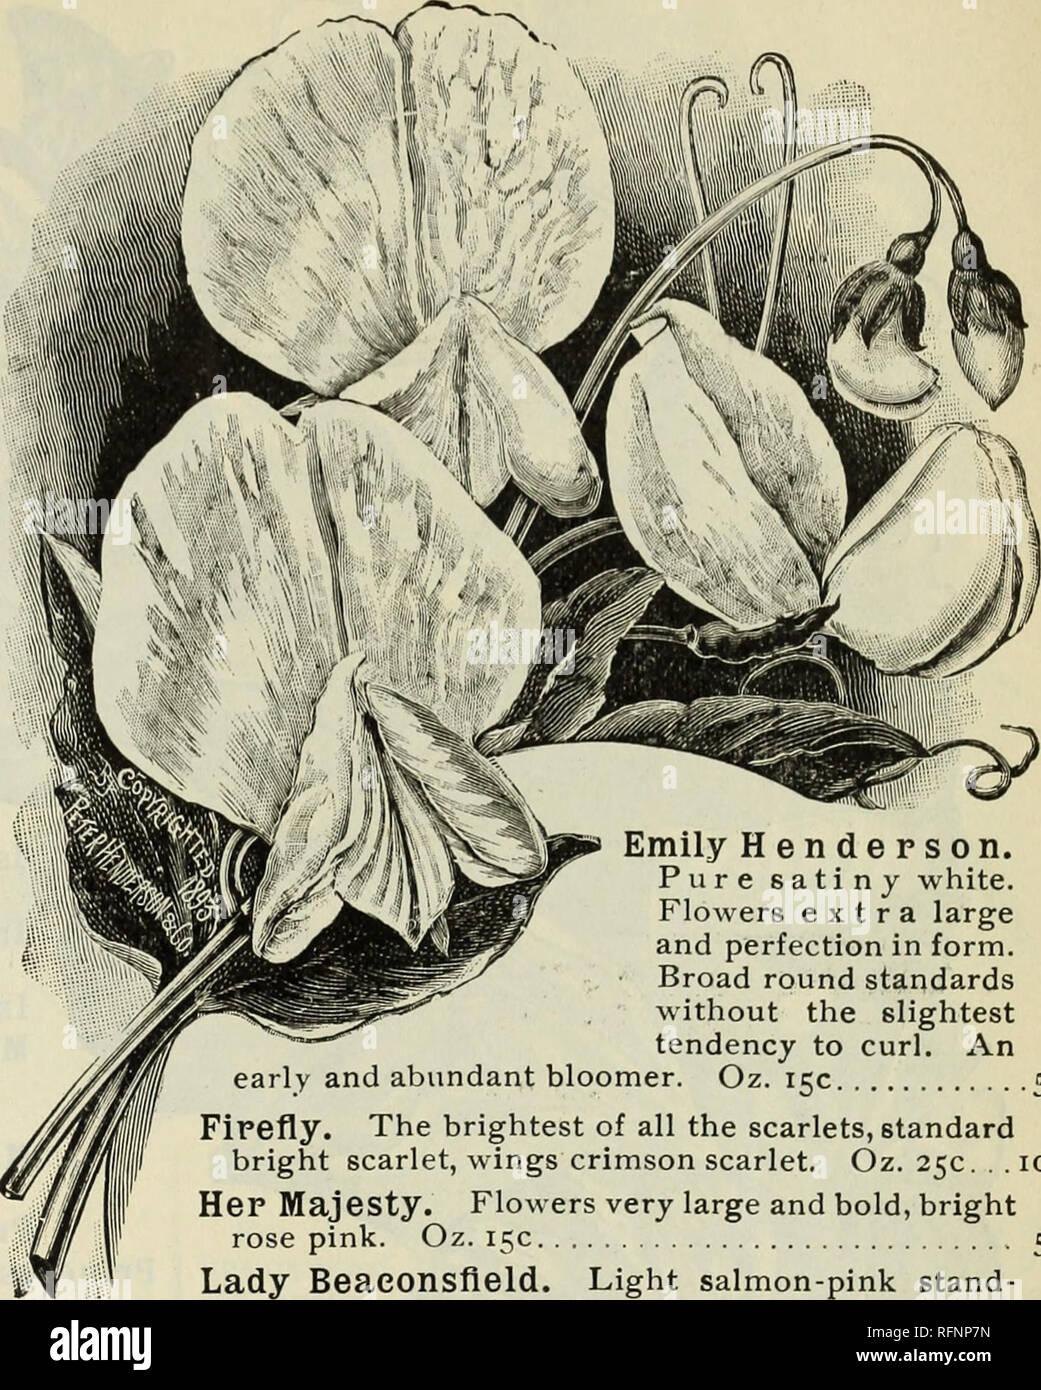 . Spring 1896. Nursery stock Ohio Catalogs; Vegetables Seeds Catalogs; Plants, Ornamental Catalogs; Fruit trees Seedlings Catalogs; Fruit Catalogs; Trees Seedlings Catalogs; Nursery stock; Vegetables; Plants, Ornamental; Fruit trees; Fruit; Trees. KATHERINE TRACY. ,2% Emily Henderson. Pure satiny white. Flowers extra large and perfection in form. Broad round standards without the slightest tendency to curl. An early and abundant bloomer. Oz. 15c 5 Firefly. The brightest of all the scarlets, standard bright scarlet, wings crimson scarlet. Oz. 25c. . 10 Her Majesty. Flowers very large and bold,  Stock Photo